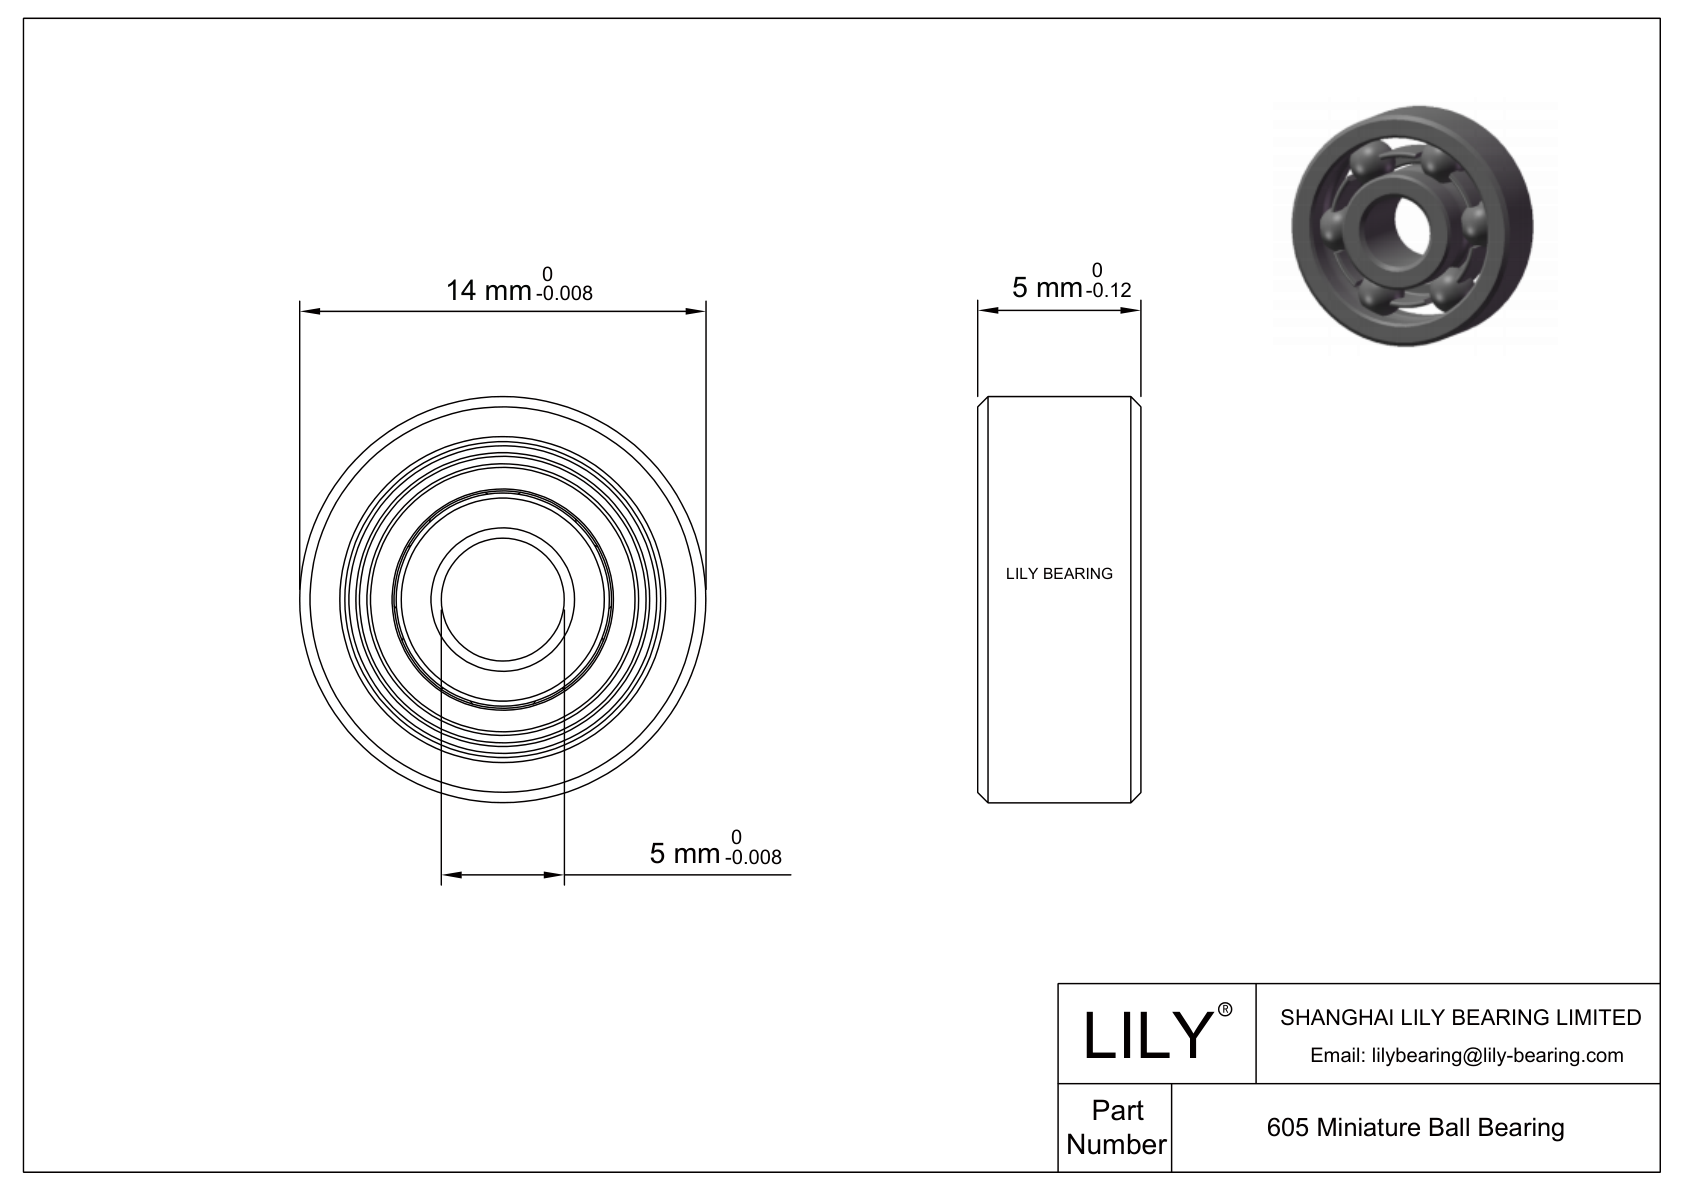 LILY-BS60521-8 POM Coated Bearing cad drawing